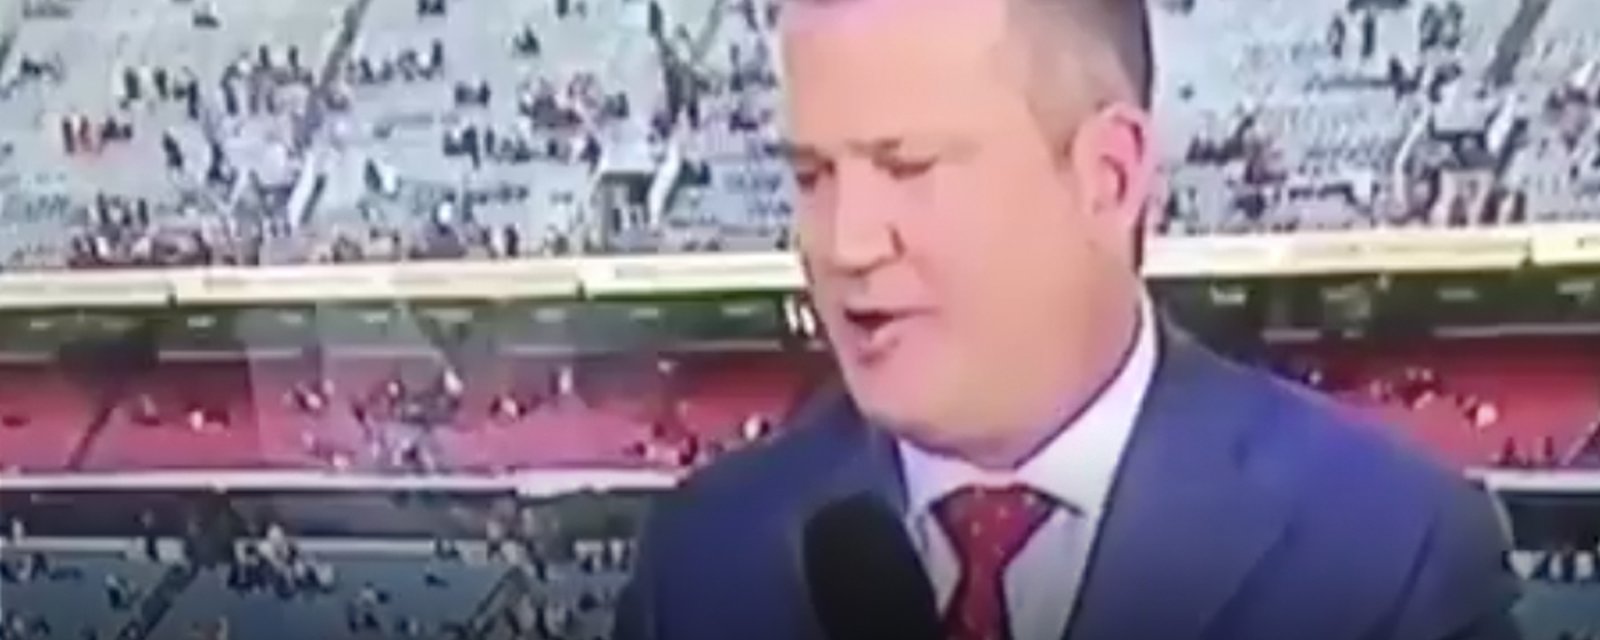 TSN analyst and former NHL'er drops an F-bomb on live TV while covering World Juniors